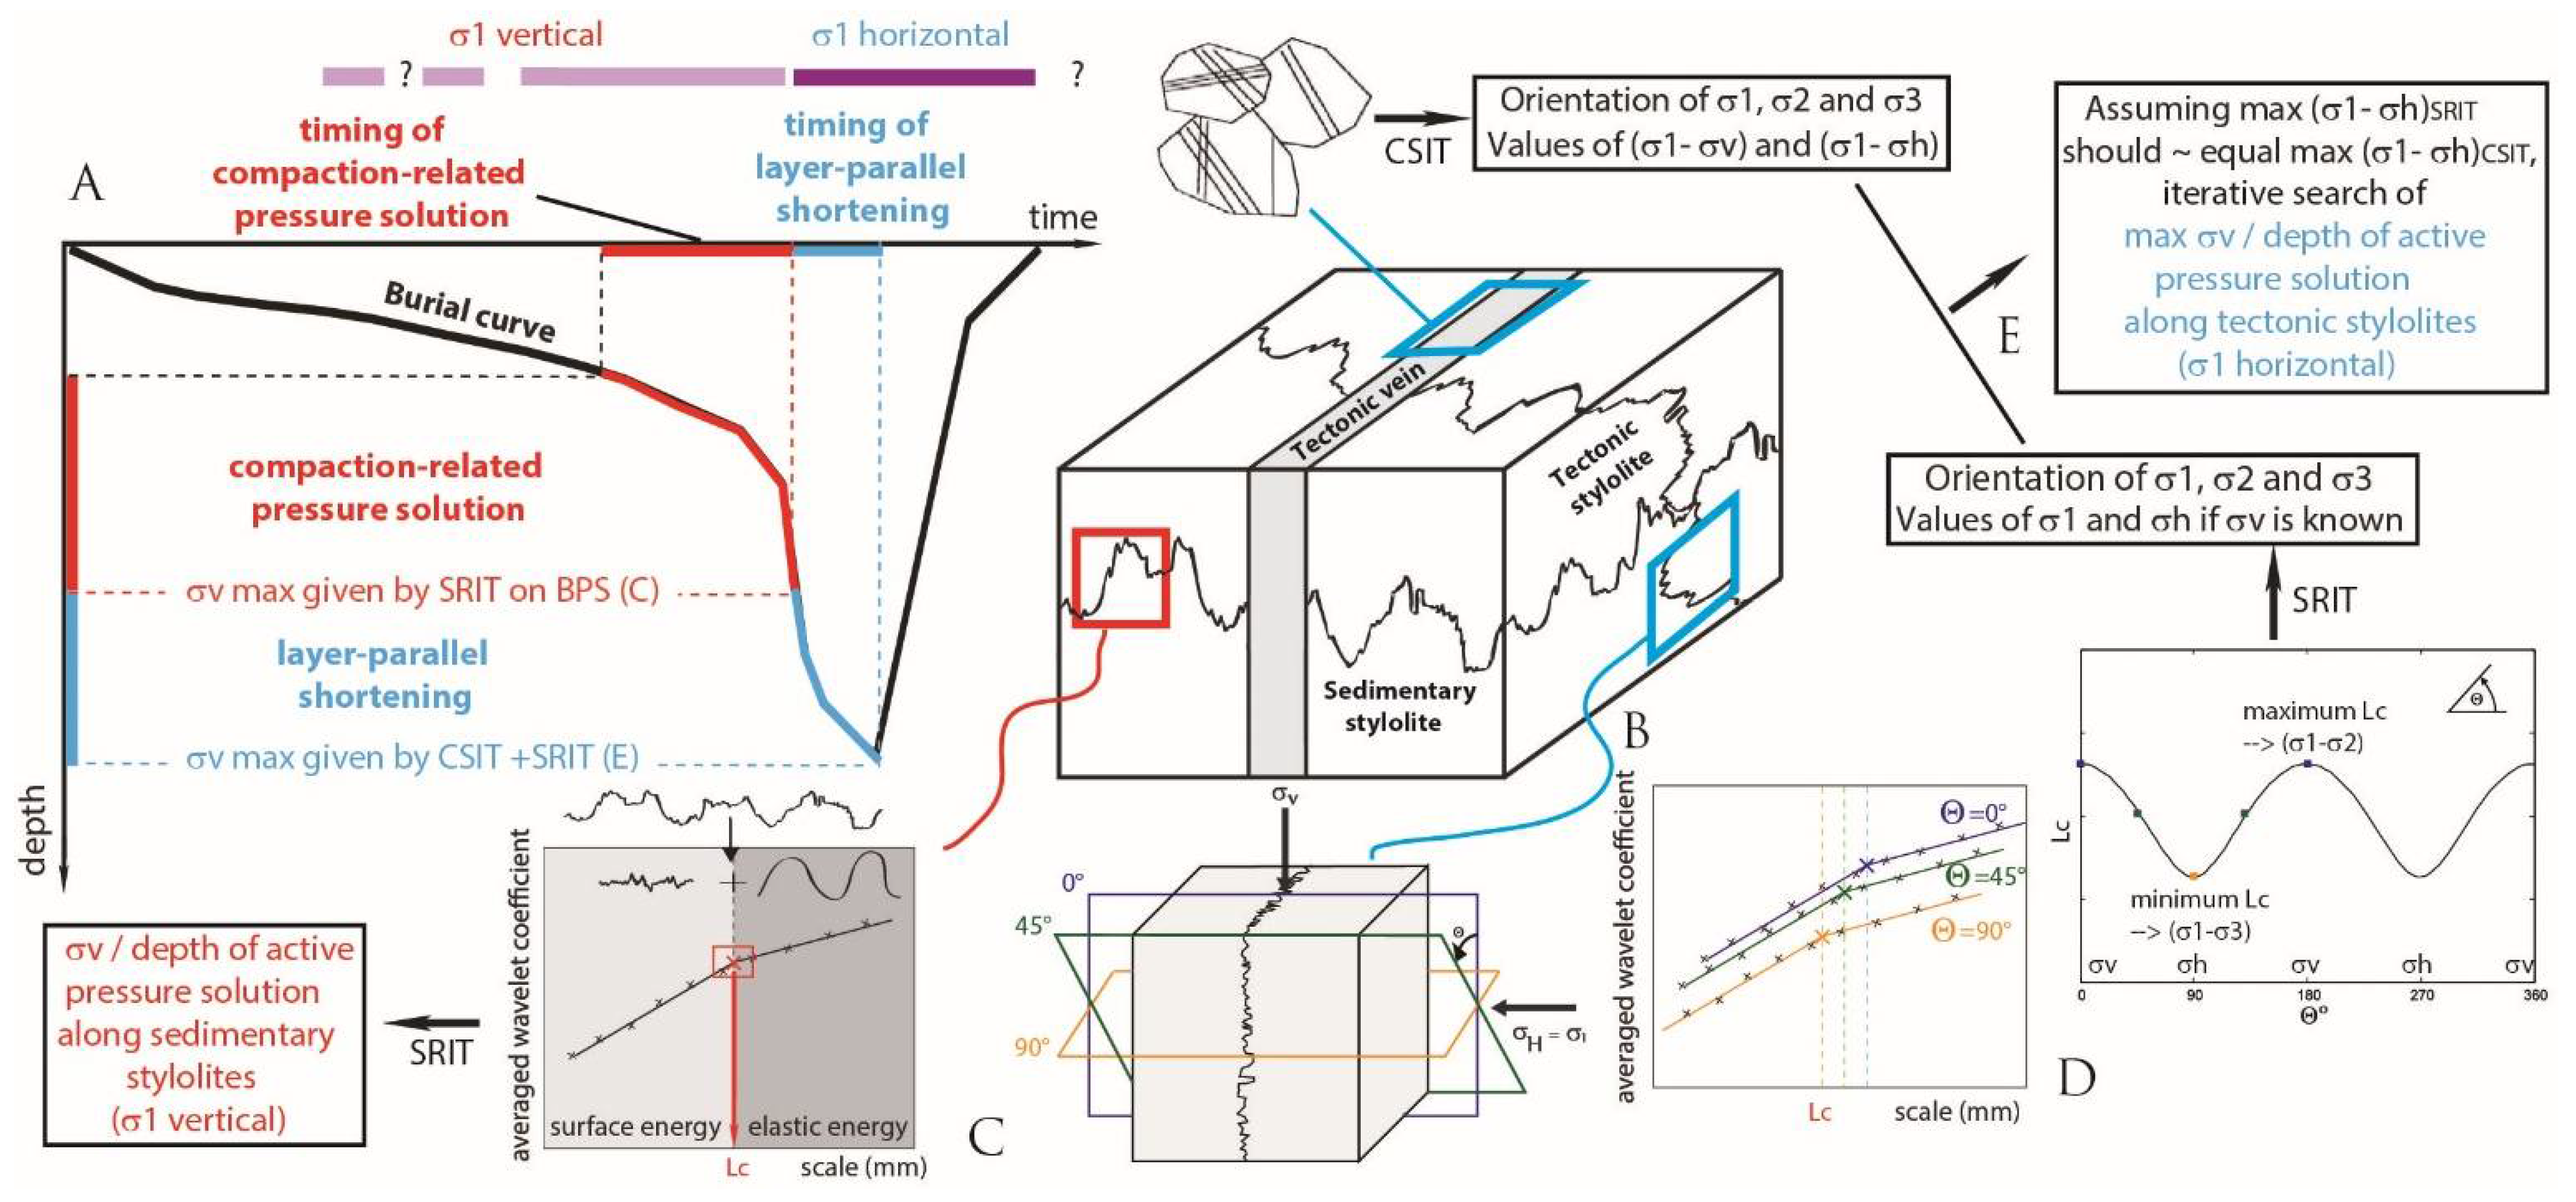 geosciences free full text calcite twin formation measurement and use as stress strain indicators a review of progress over the last decade html